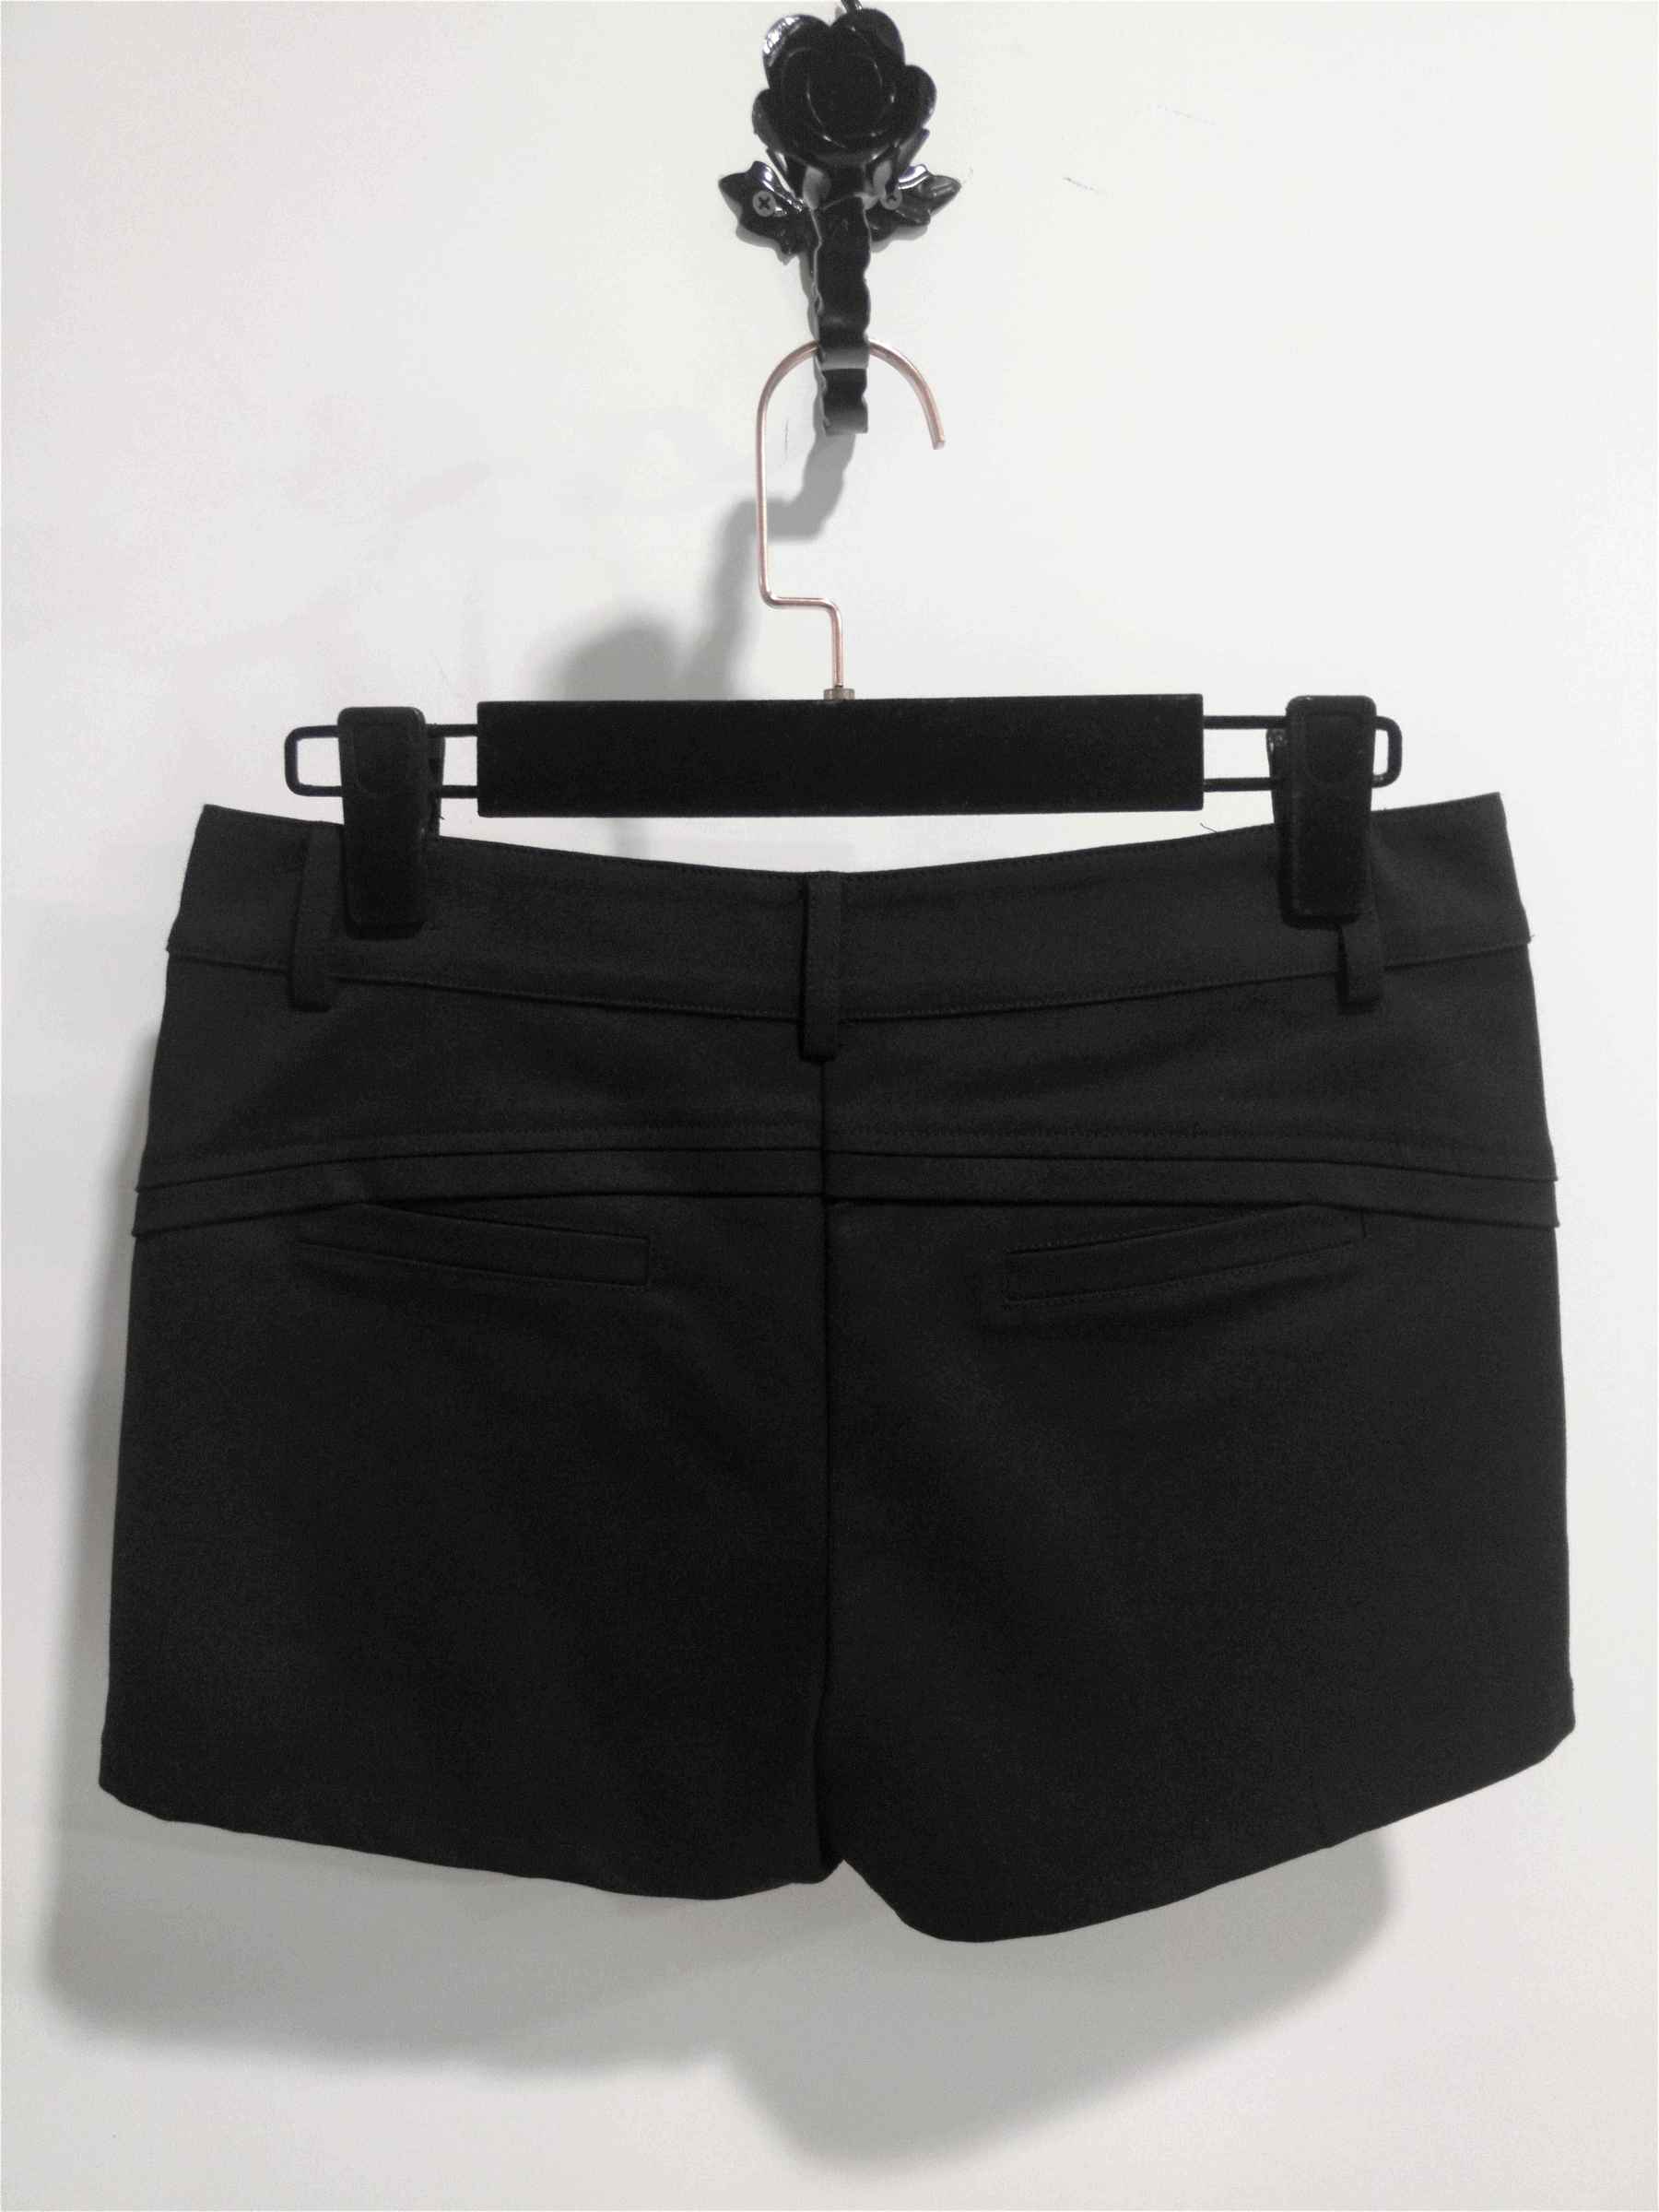 Ladies shorts for woman black ladies formal shorts with flexible stretchable breathable ladies hot pants (Copy).jpg